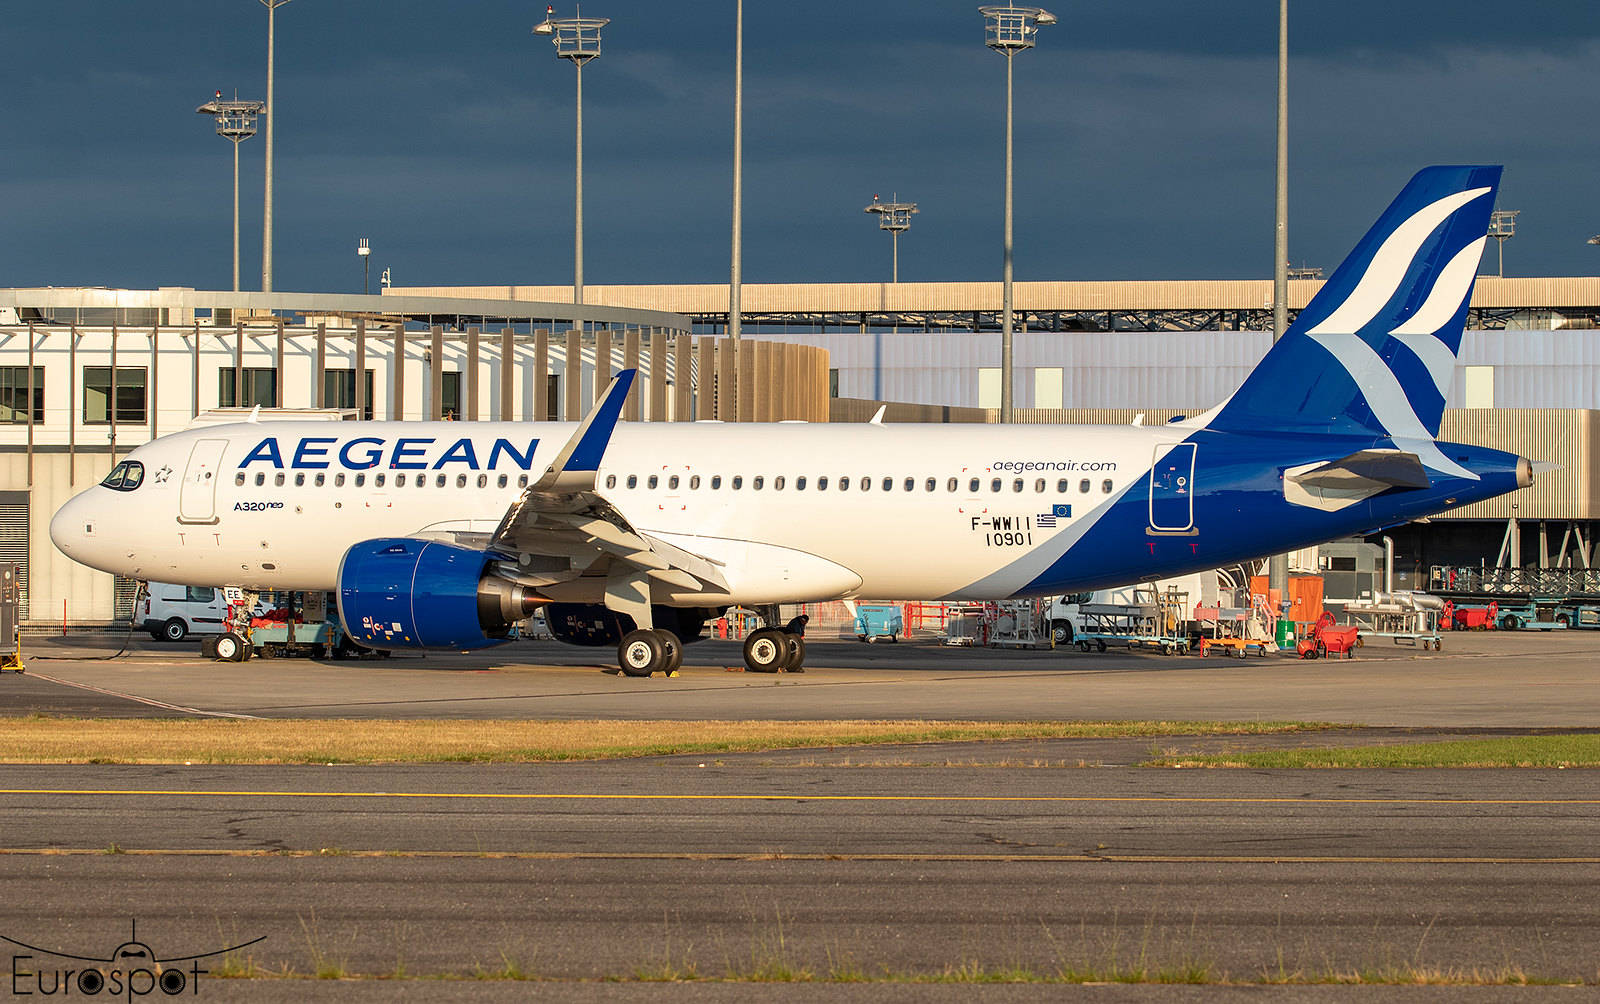 Aegean Airlines Airbus A320-271N Plane At Airport Wallpaper